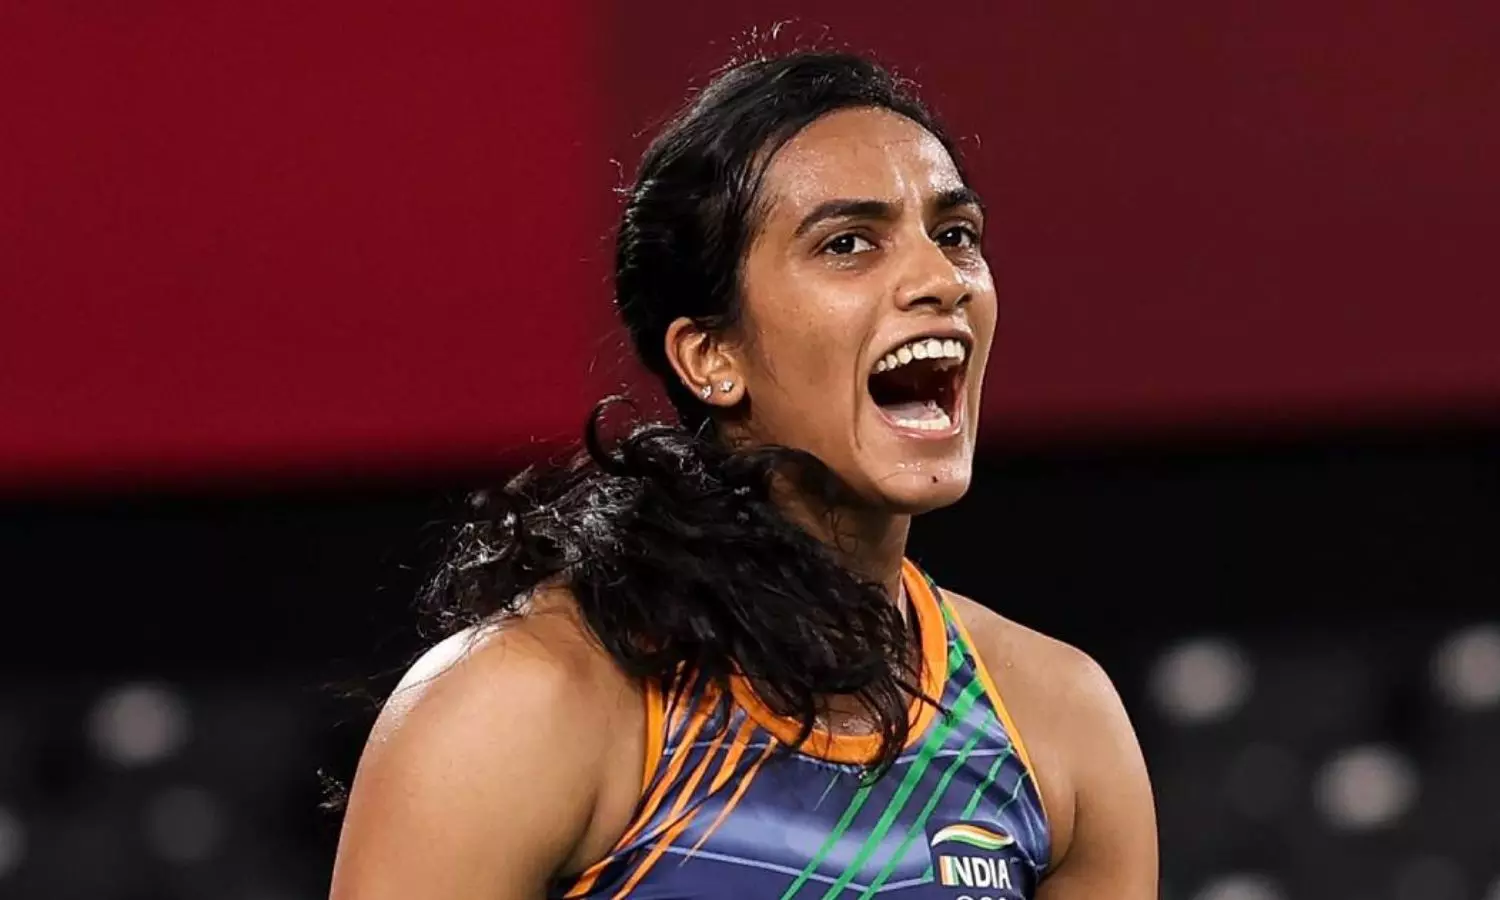 Tearful PV Sindhu vows to return to her best after Singapore Open exit